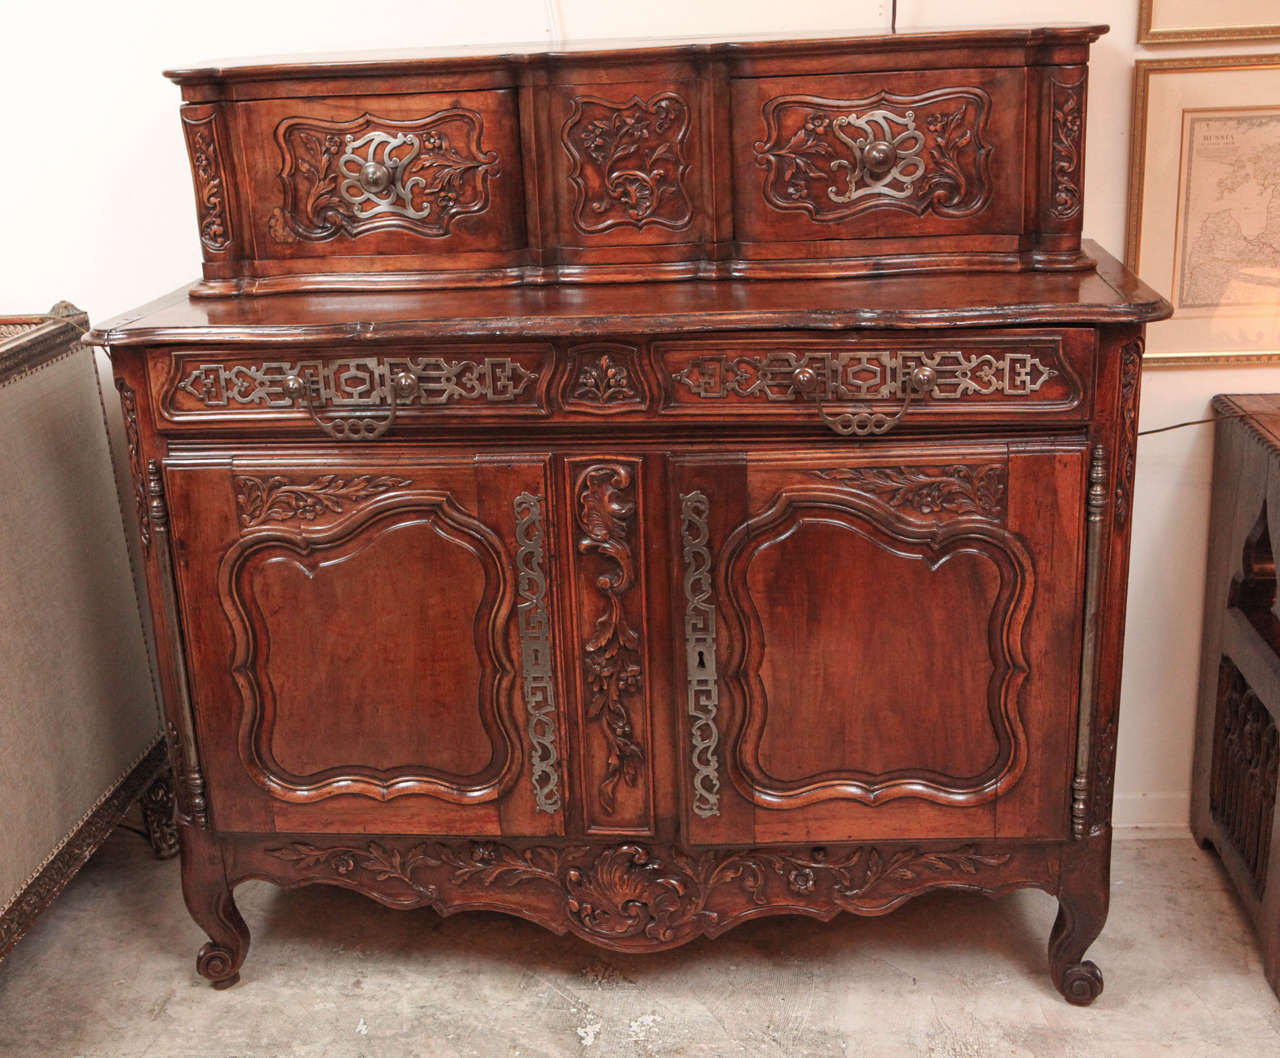 18th century very finely carved French walnut two-part sideboard with original iron hardware.